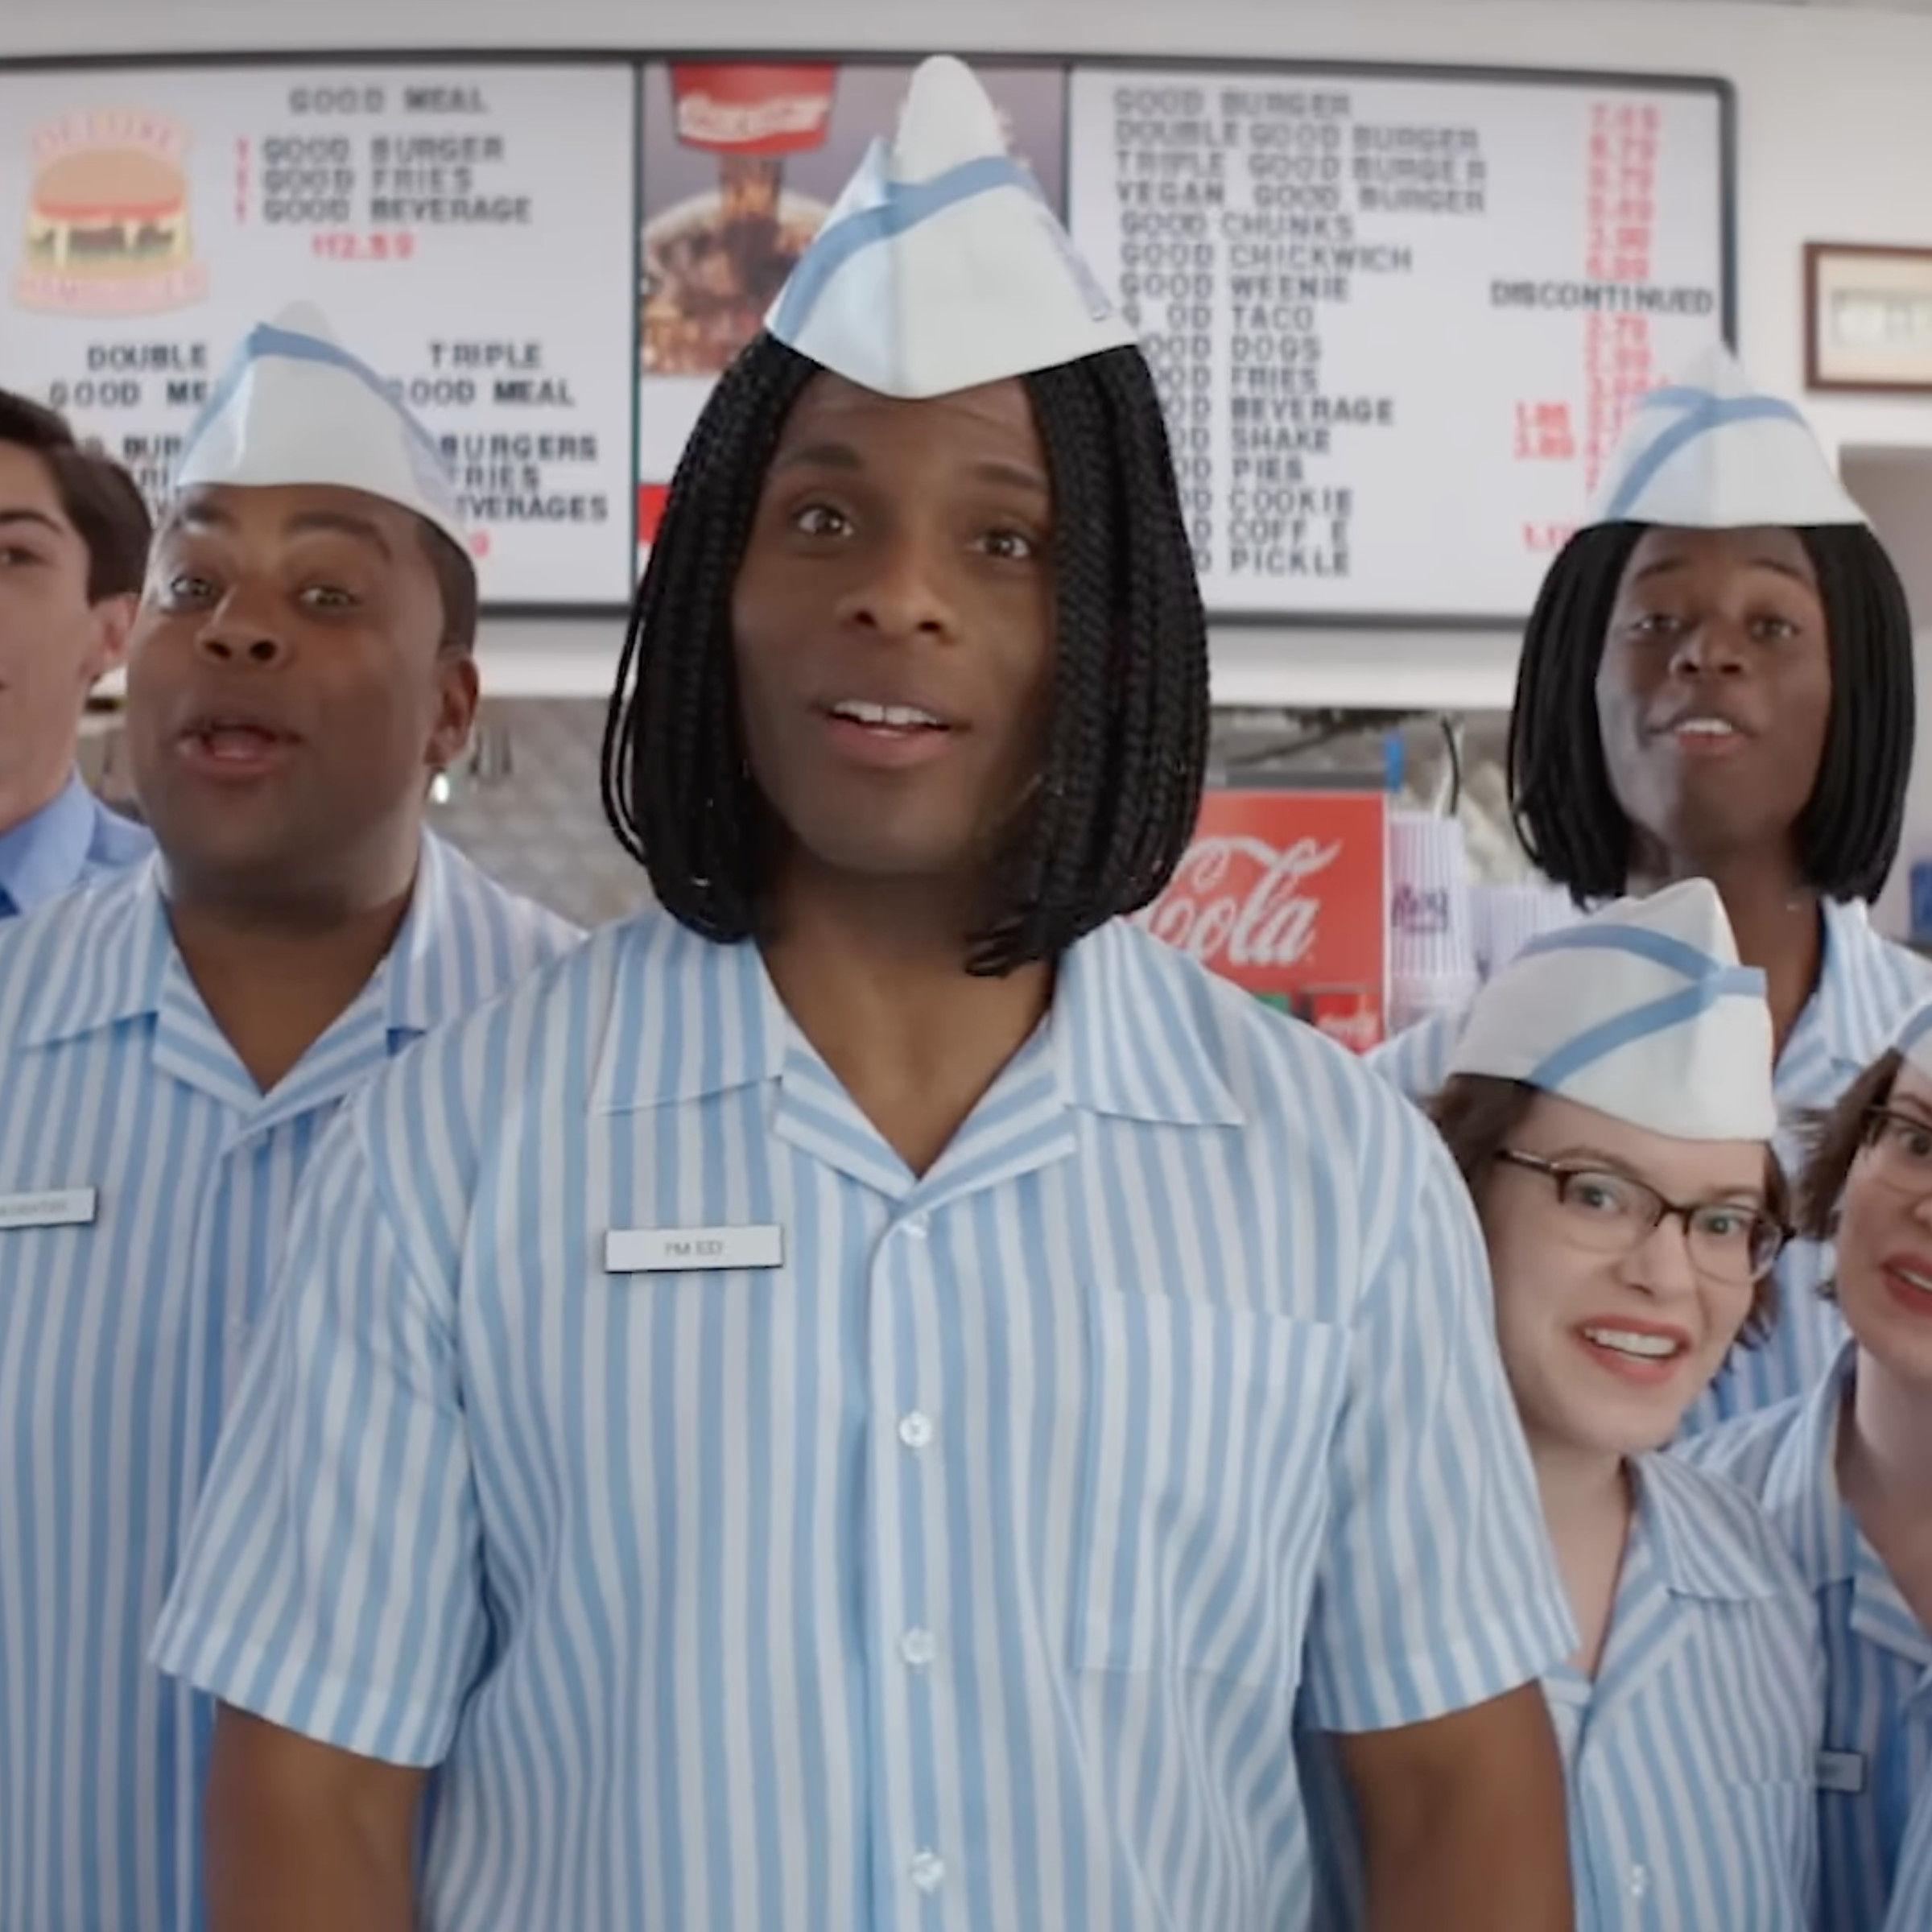 A screenshot from the Good Burger 2 teaser showing the employees of Good Burger in the new film.